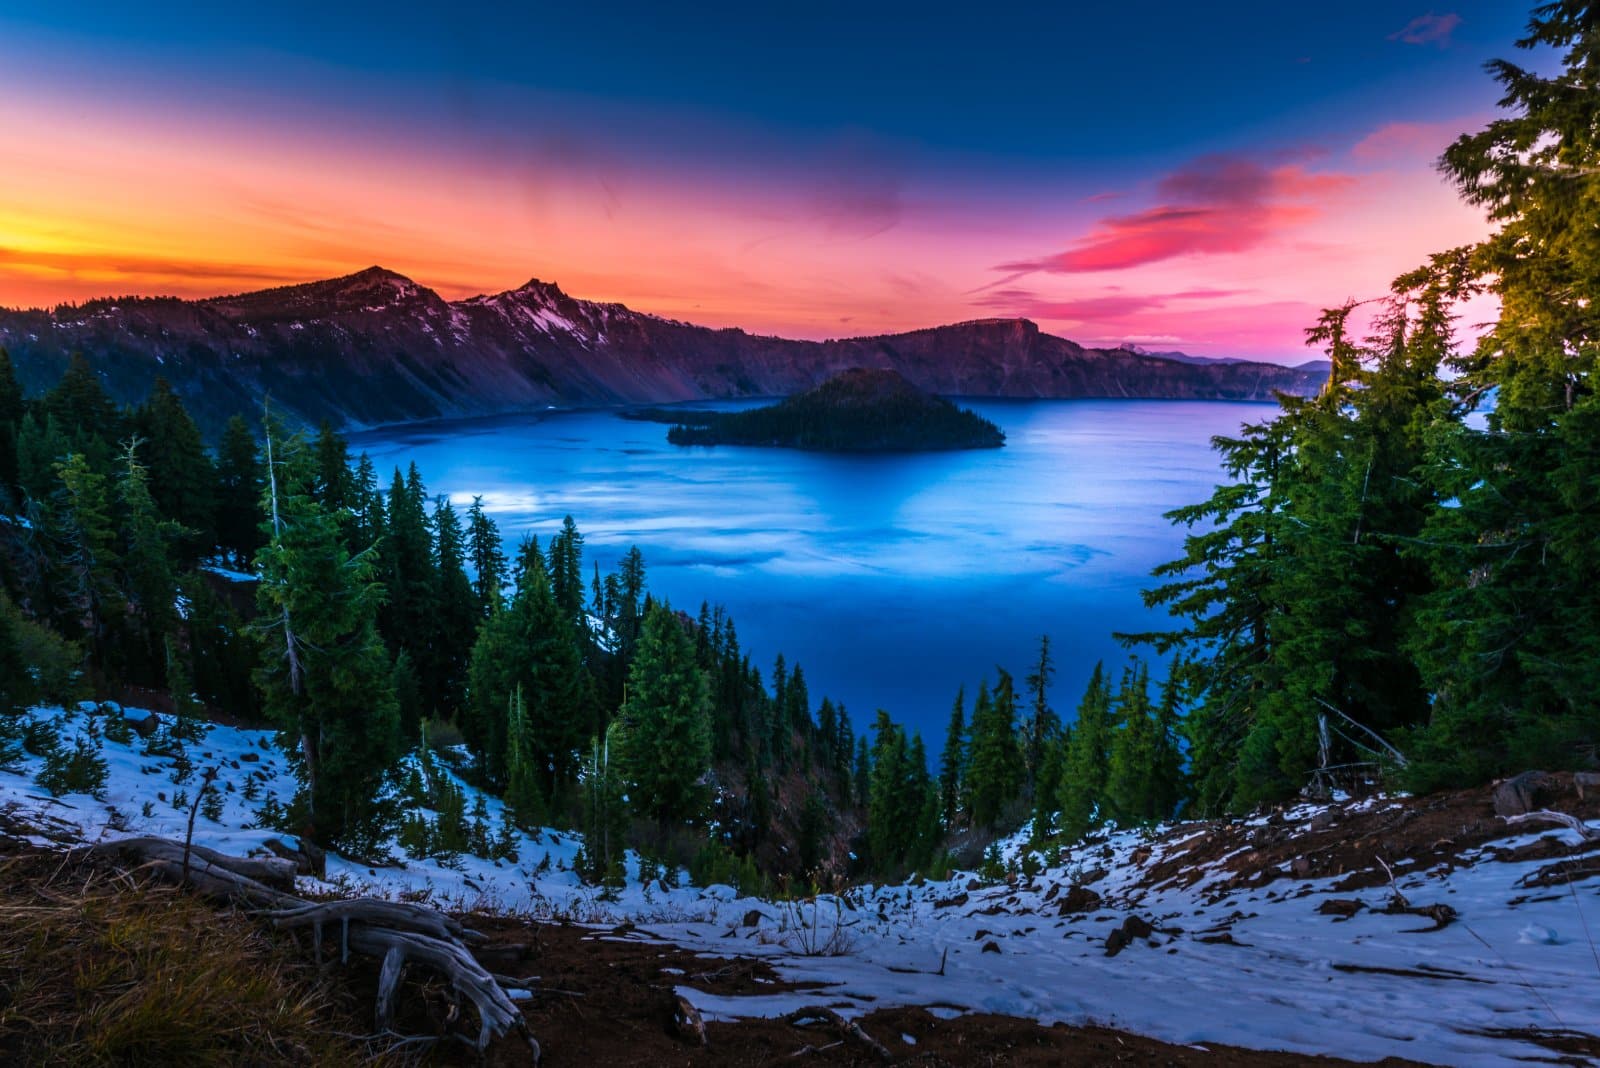 <p>Oregon’s natural landscapes help it attract over $12.3 billion in tourism revenue. Crater Lake National Park charges around $30 per vehicle for a 7-day pass, offering breathtaking views and pristine nature experiences.</p>